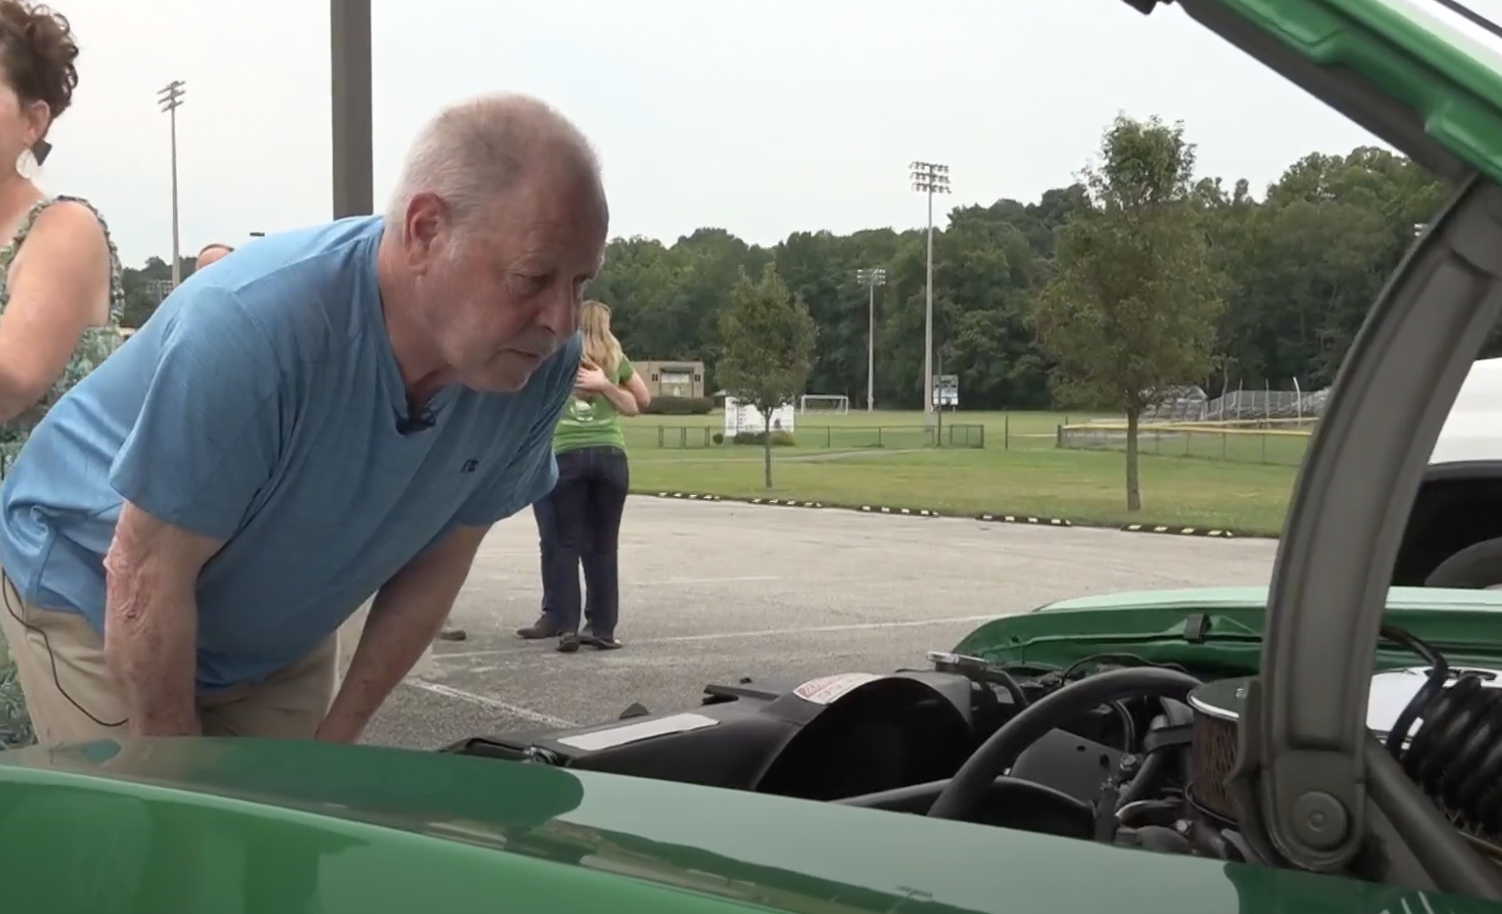 Surprise Visit from Vintage Car Delivers Heartfelt Reunion for Man with Terminal Cancer